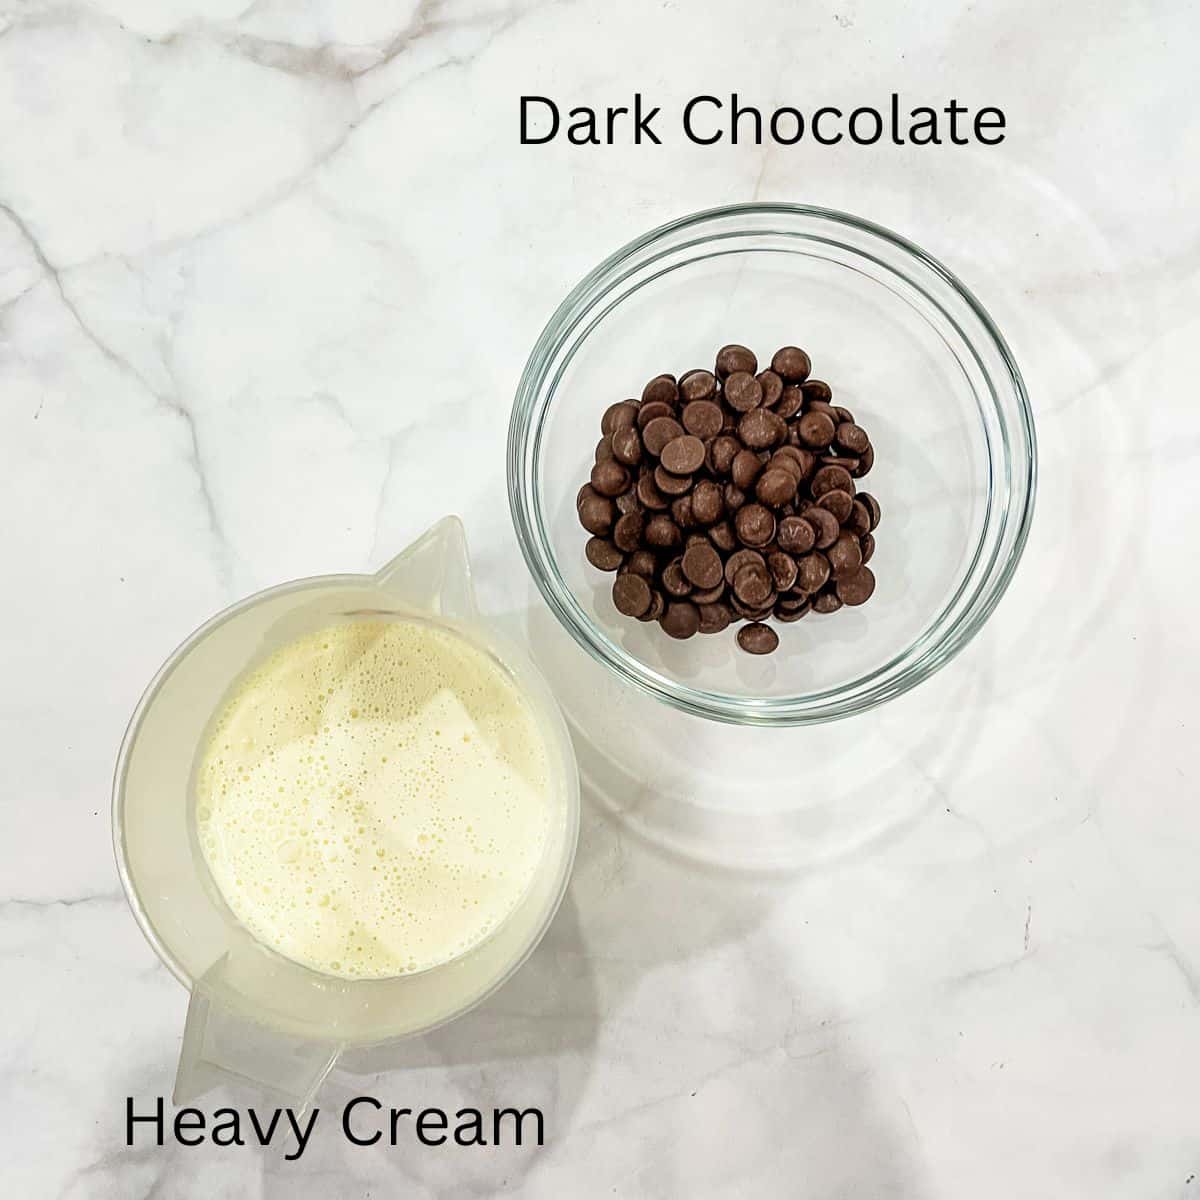 A bowl of dark chocolate chips and jug of cream against marble background.